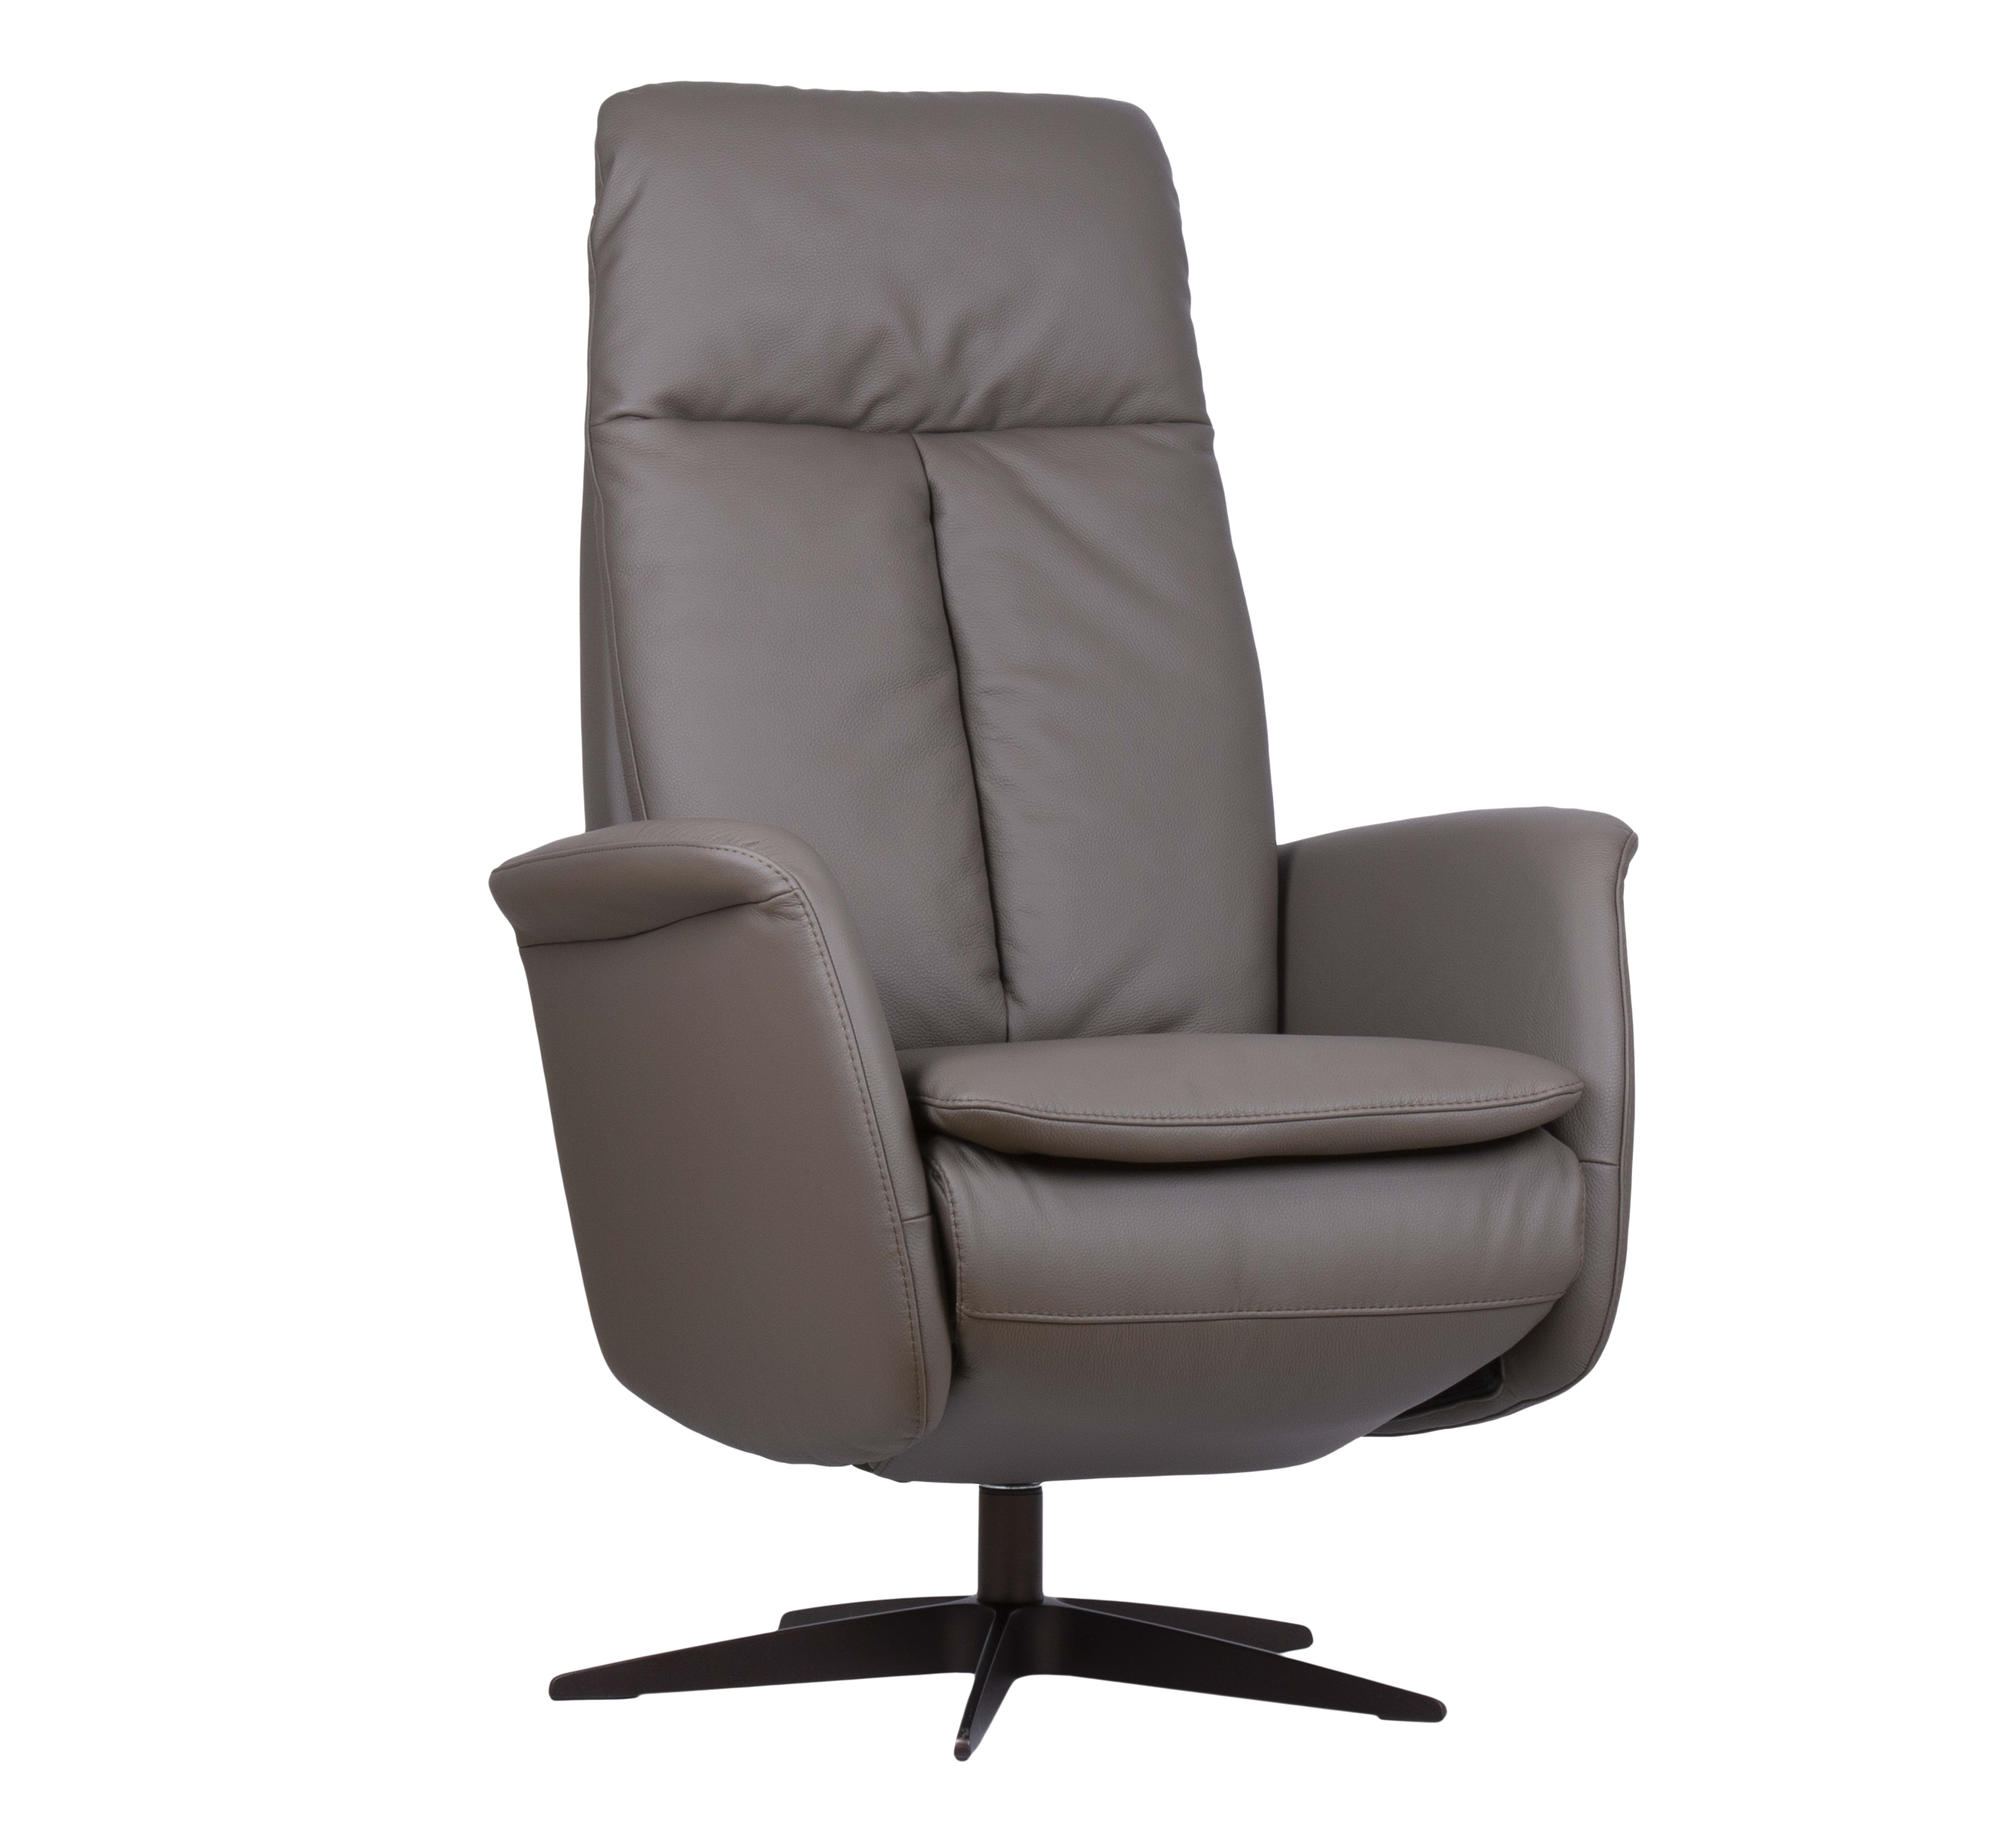 Twinz 5002 relaxfauteuil